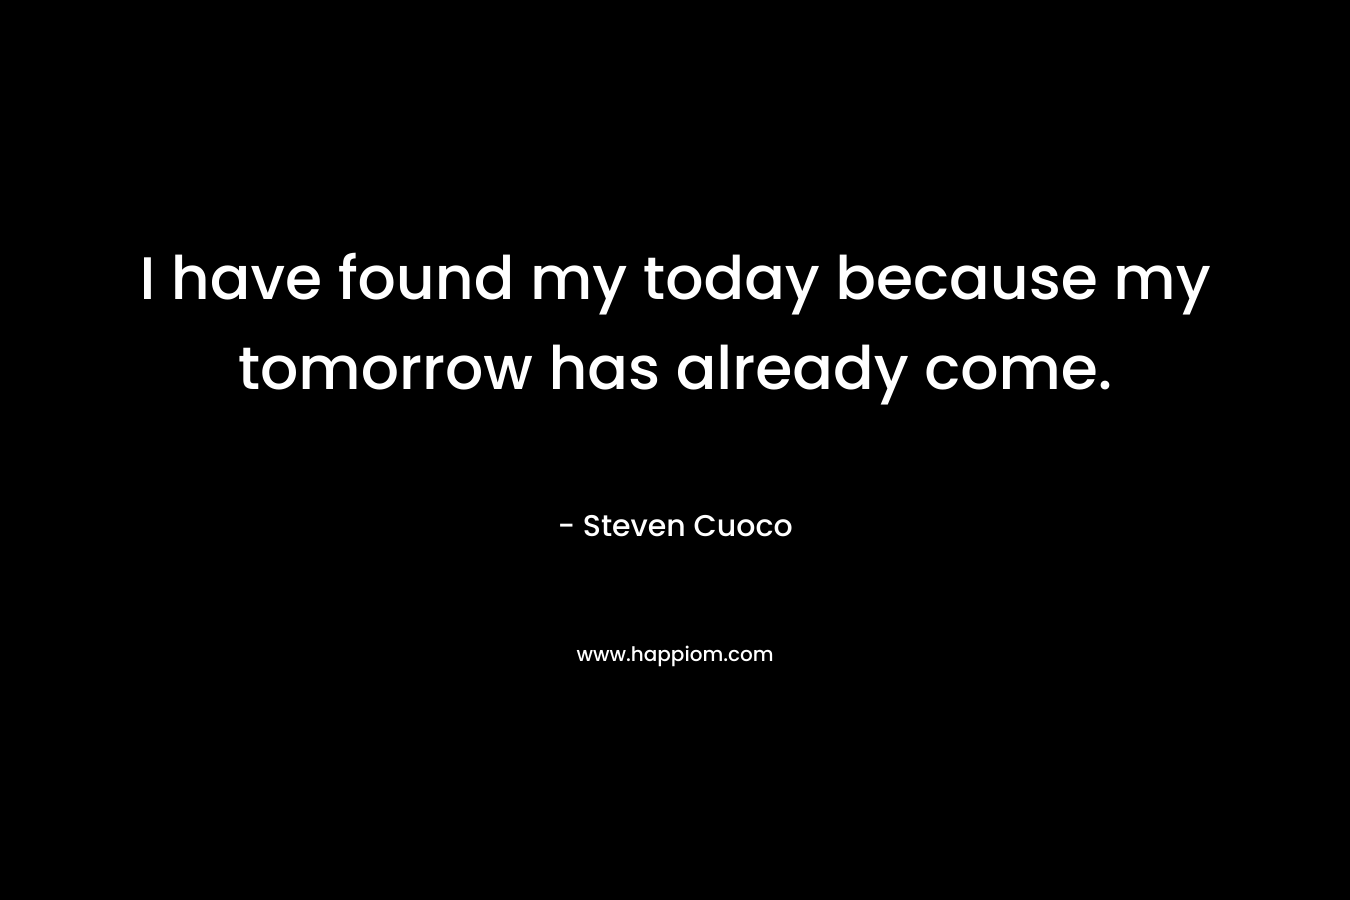 I have found my today because my tomorrow has already come.